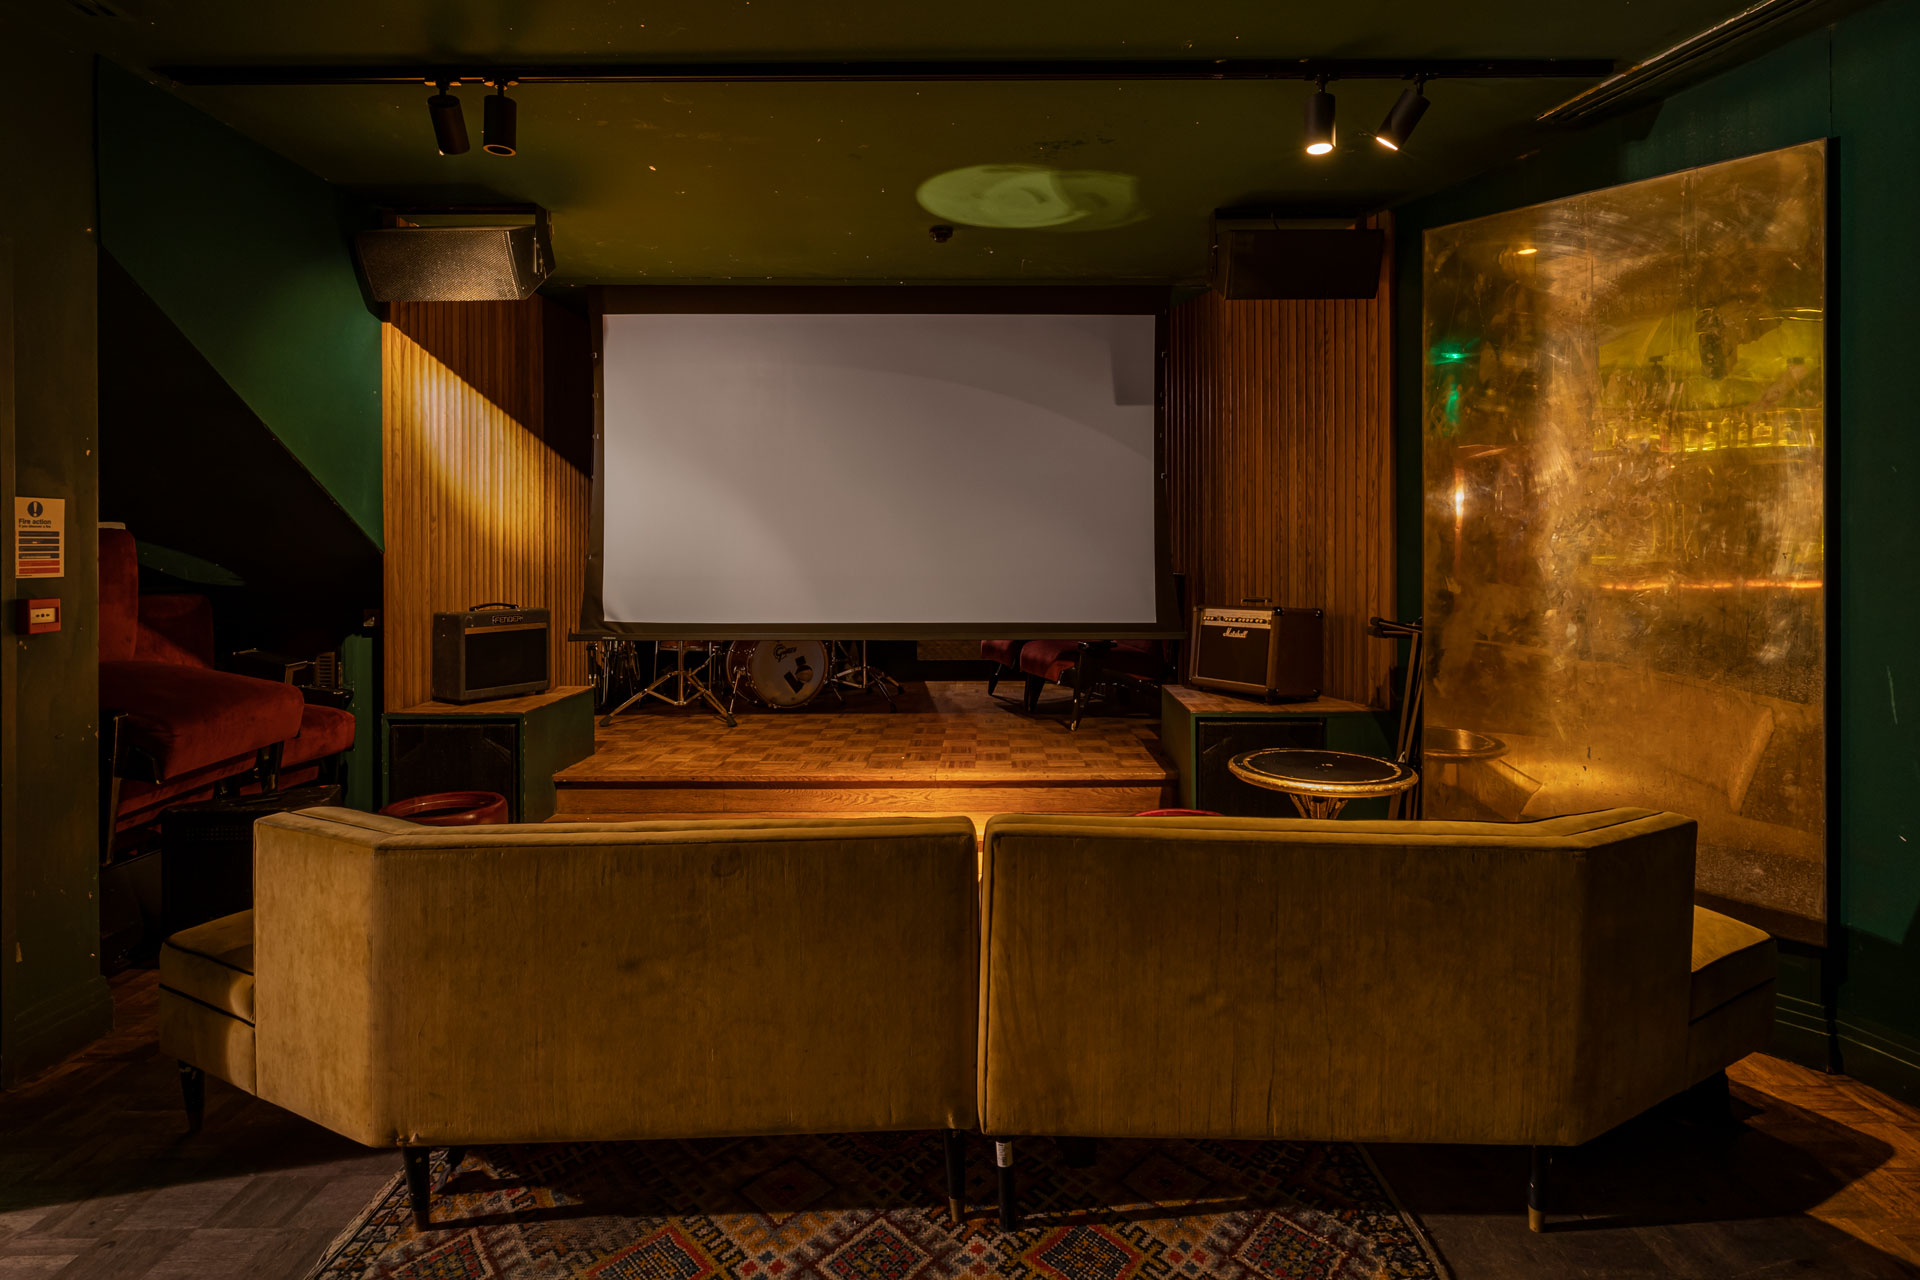 Cinema room with large projector screen and mustard yellow velvet seats